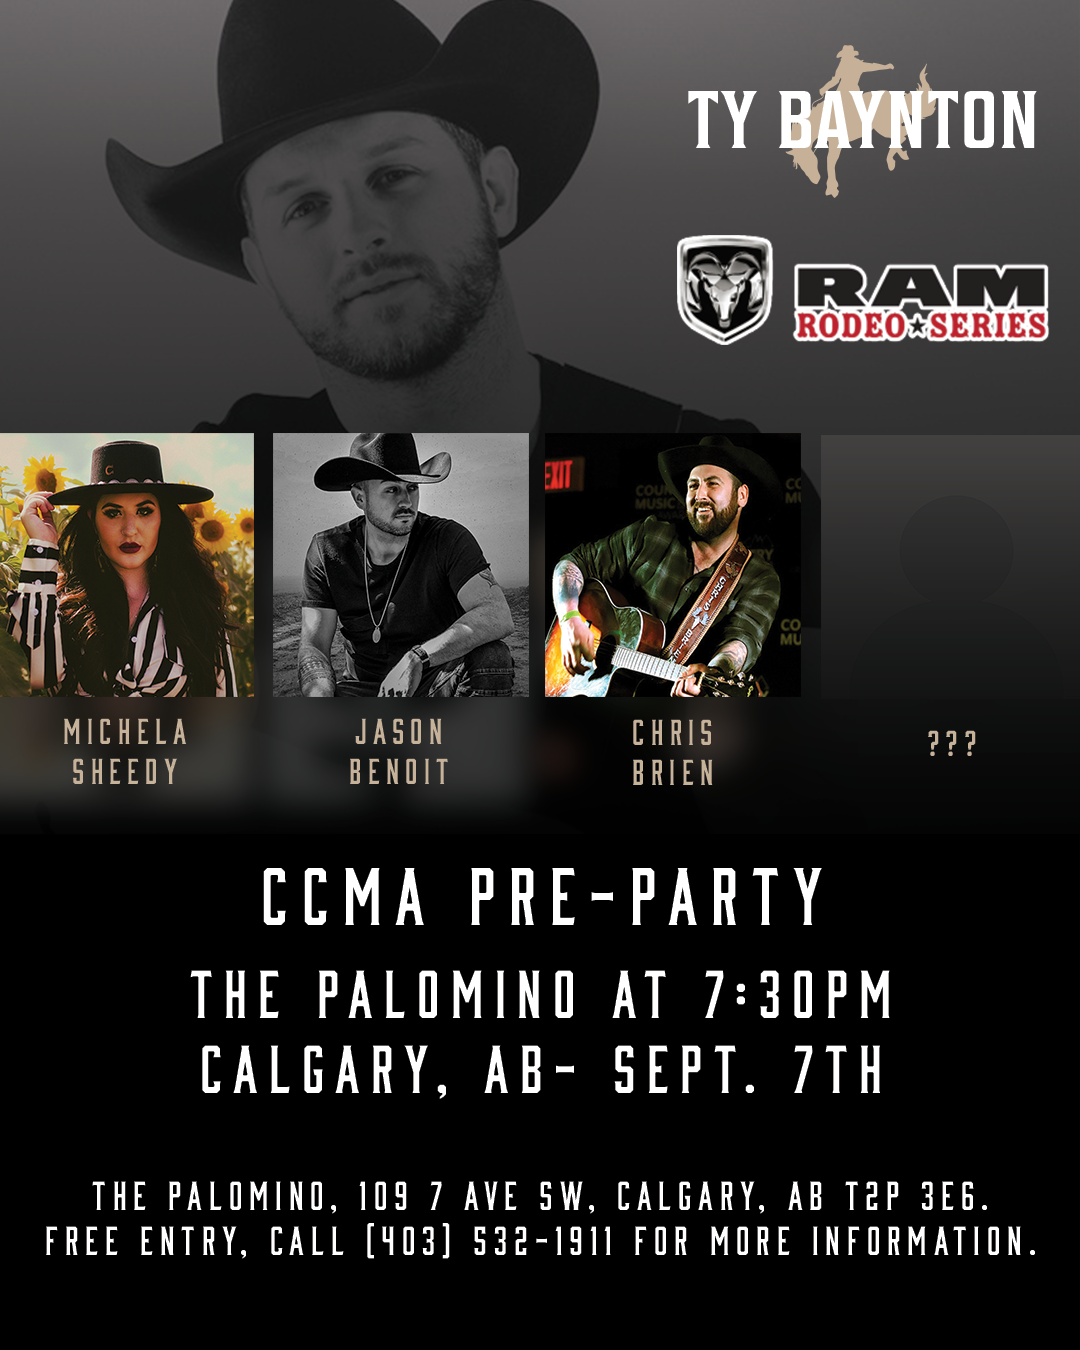 Ty Baynton-Ram Rodeo CCMA Pre-Party Promotional Graphics (2022). 